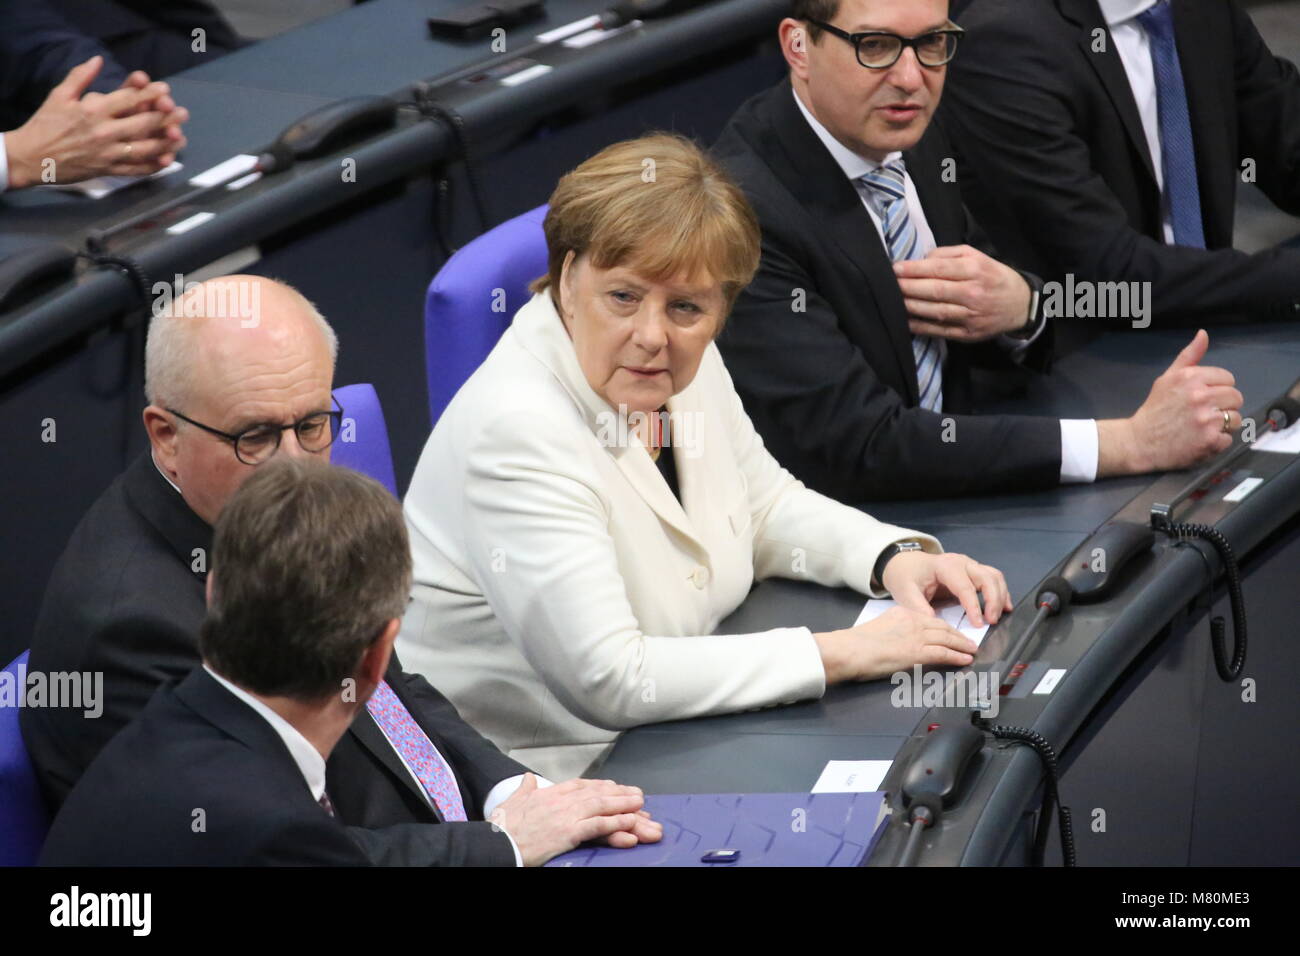 Angela Merkel (CDU) was elected for the fourth time today as Chancellor ...